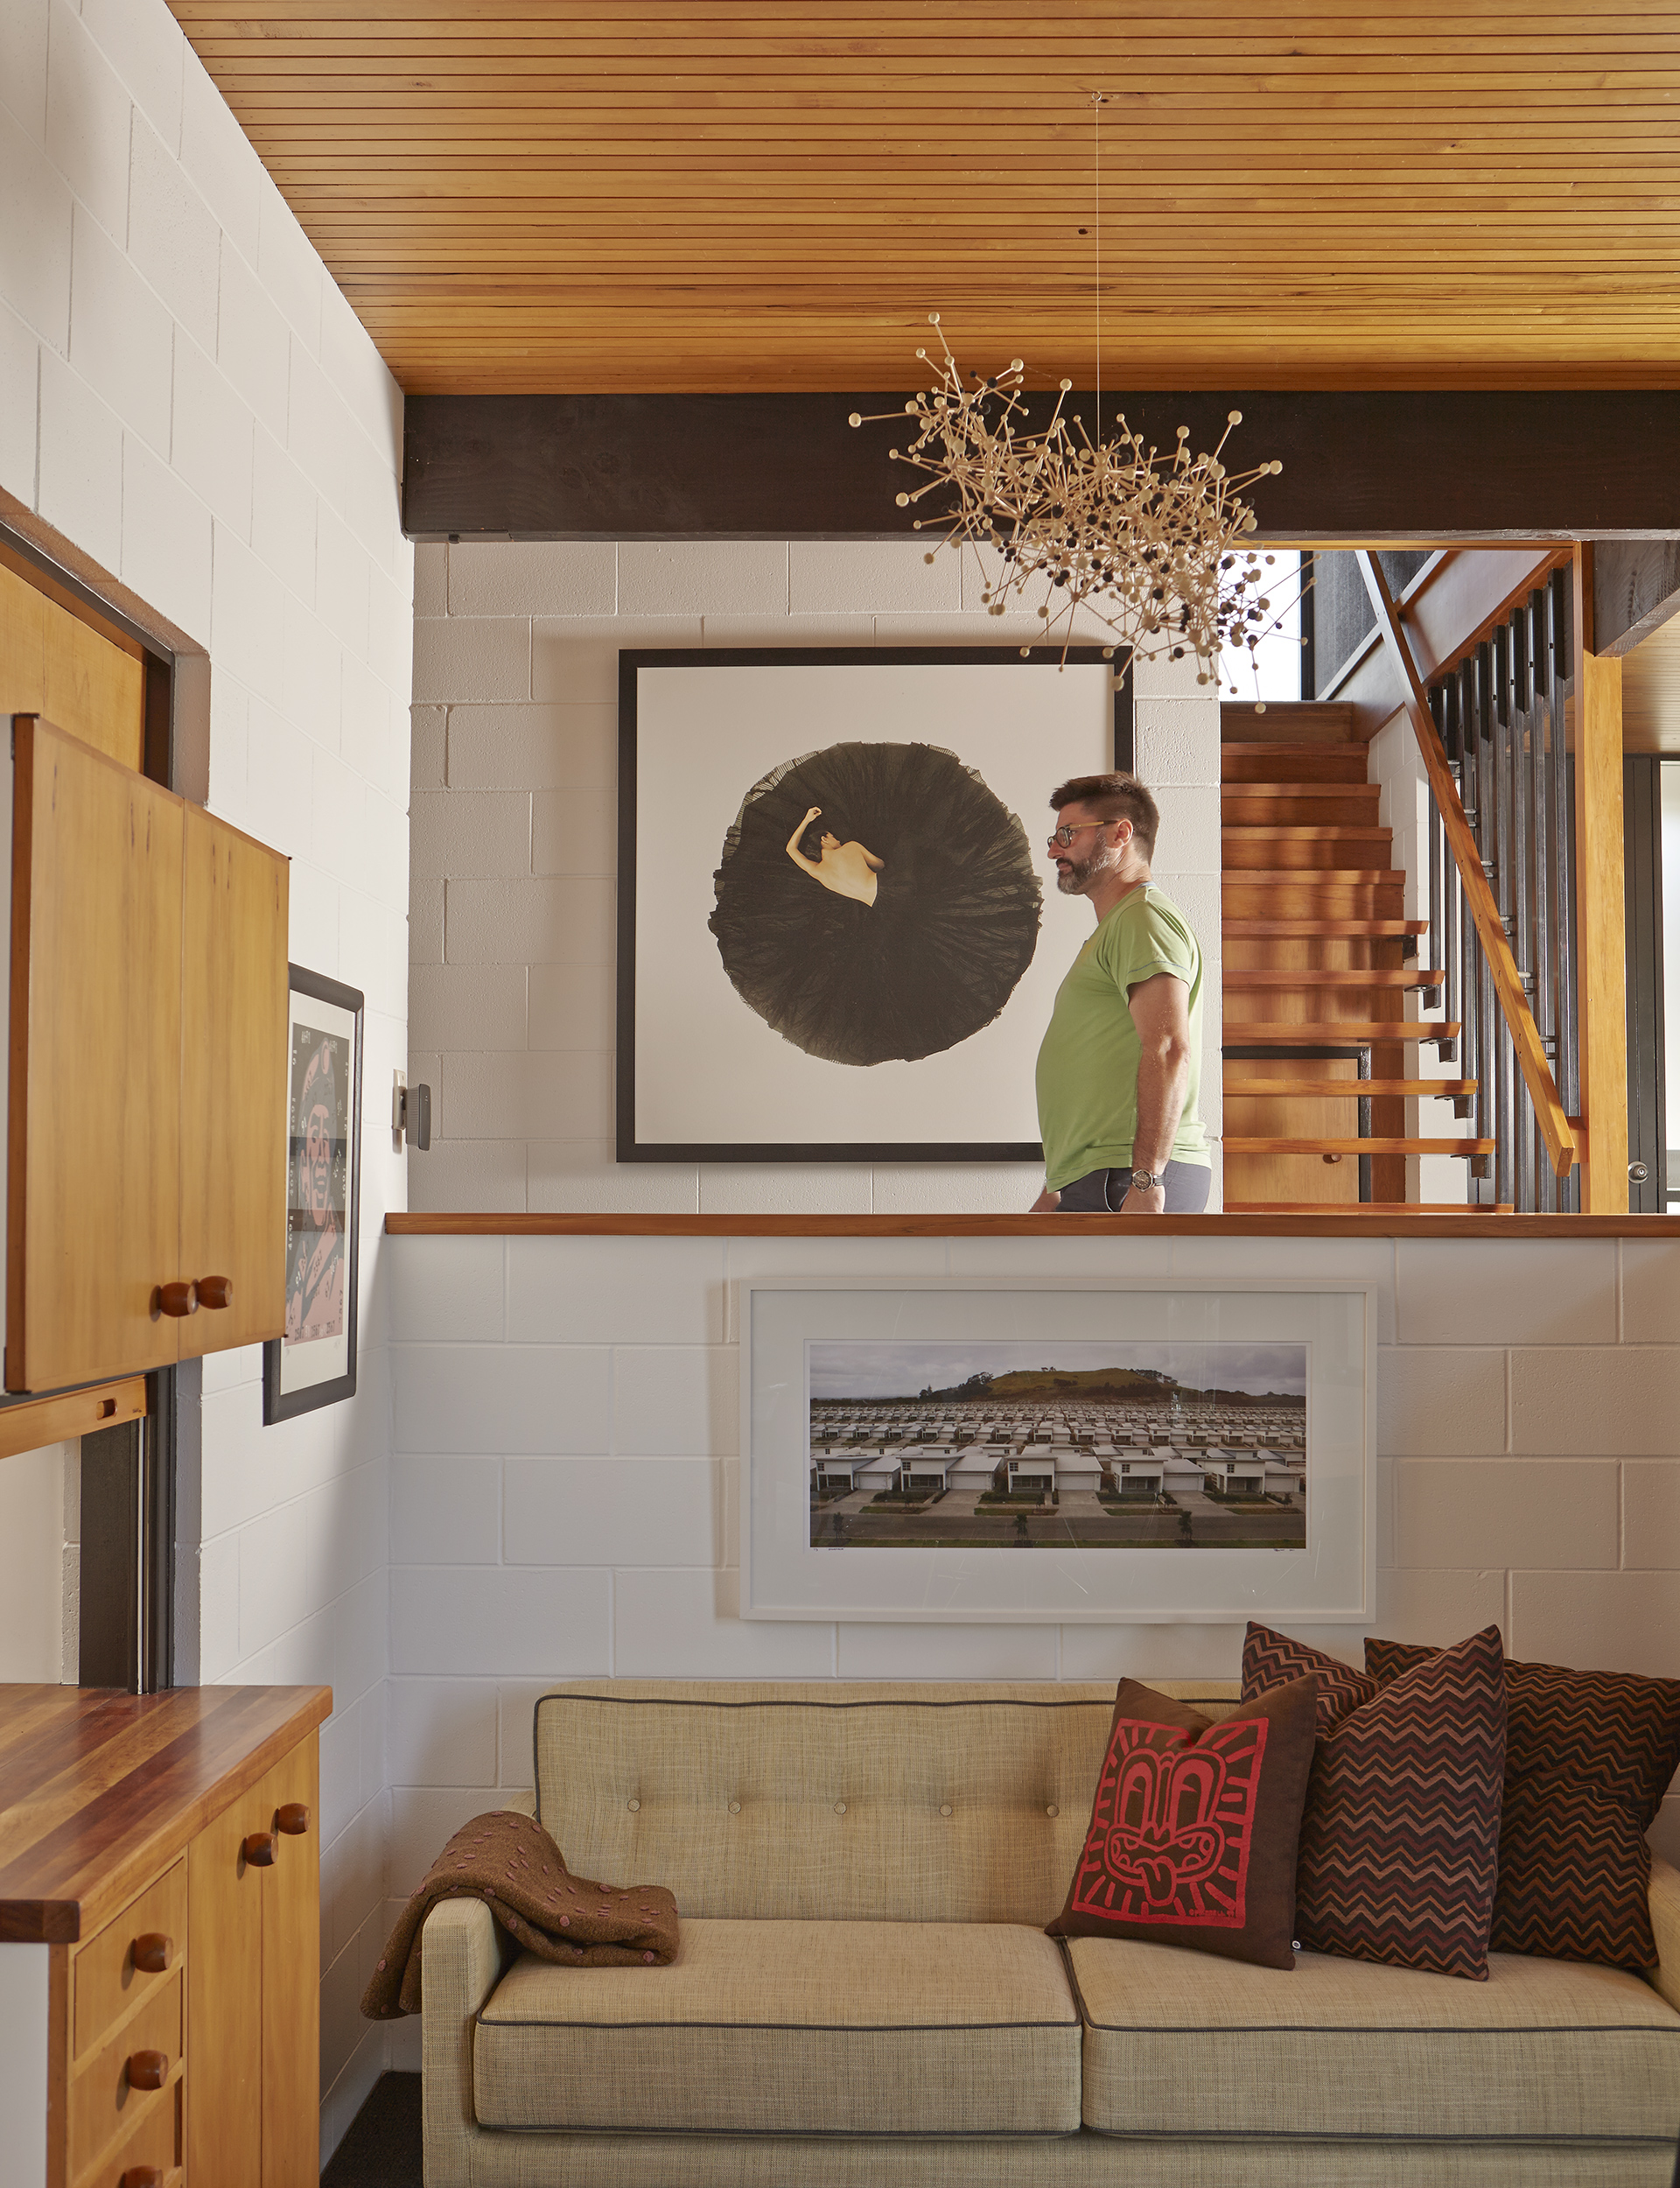 Dean walks past a photograph entitled ‘Circle’ by Rohan D Souza, while above him is Constellation’, a mounted sculpture by Kevin Osmond, a bespoke piece created for the home while the artist was in residence. The art work on the lower wall is ‘Stonefields’, an image by P J Paterson.